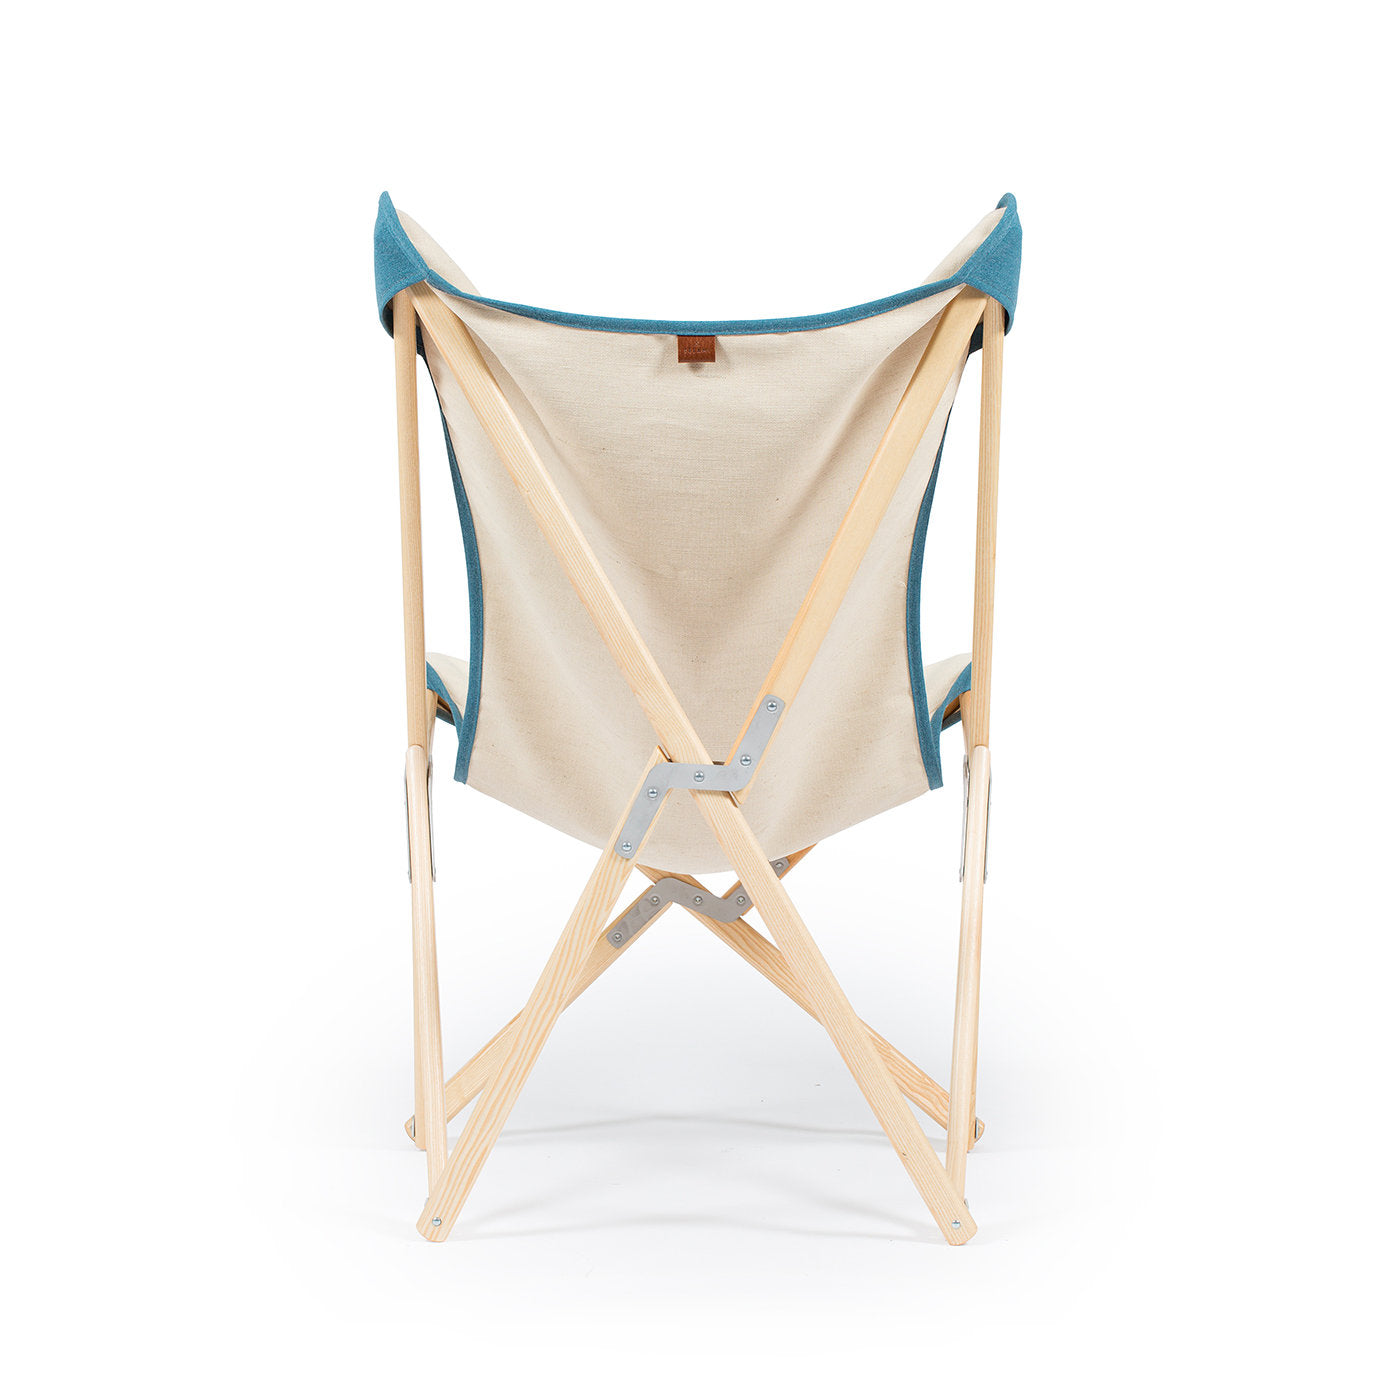 Tripolina Armchair in Cream and Teal Blue - Alternative view 3